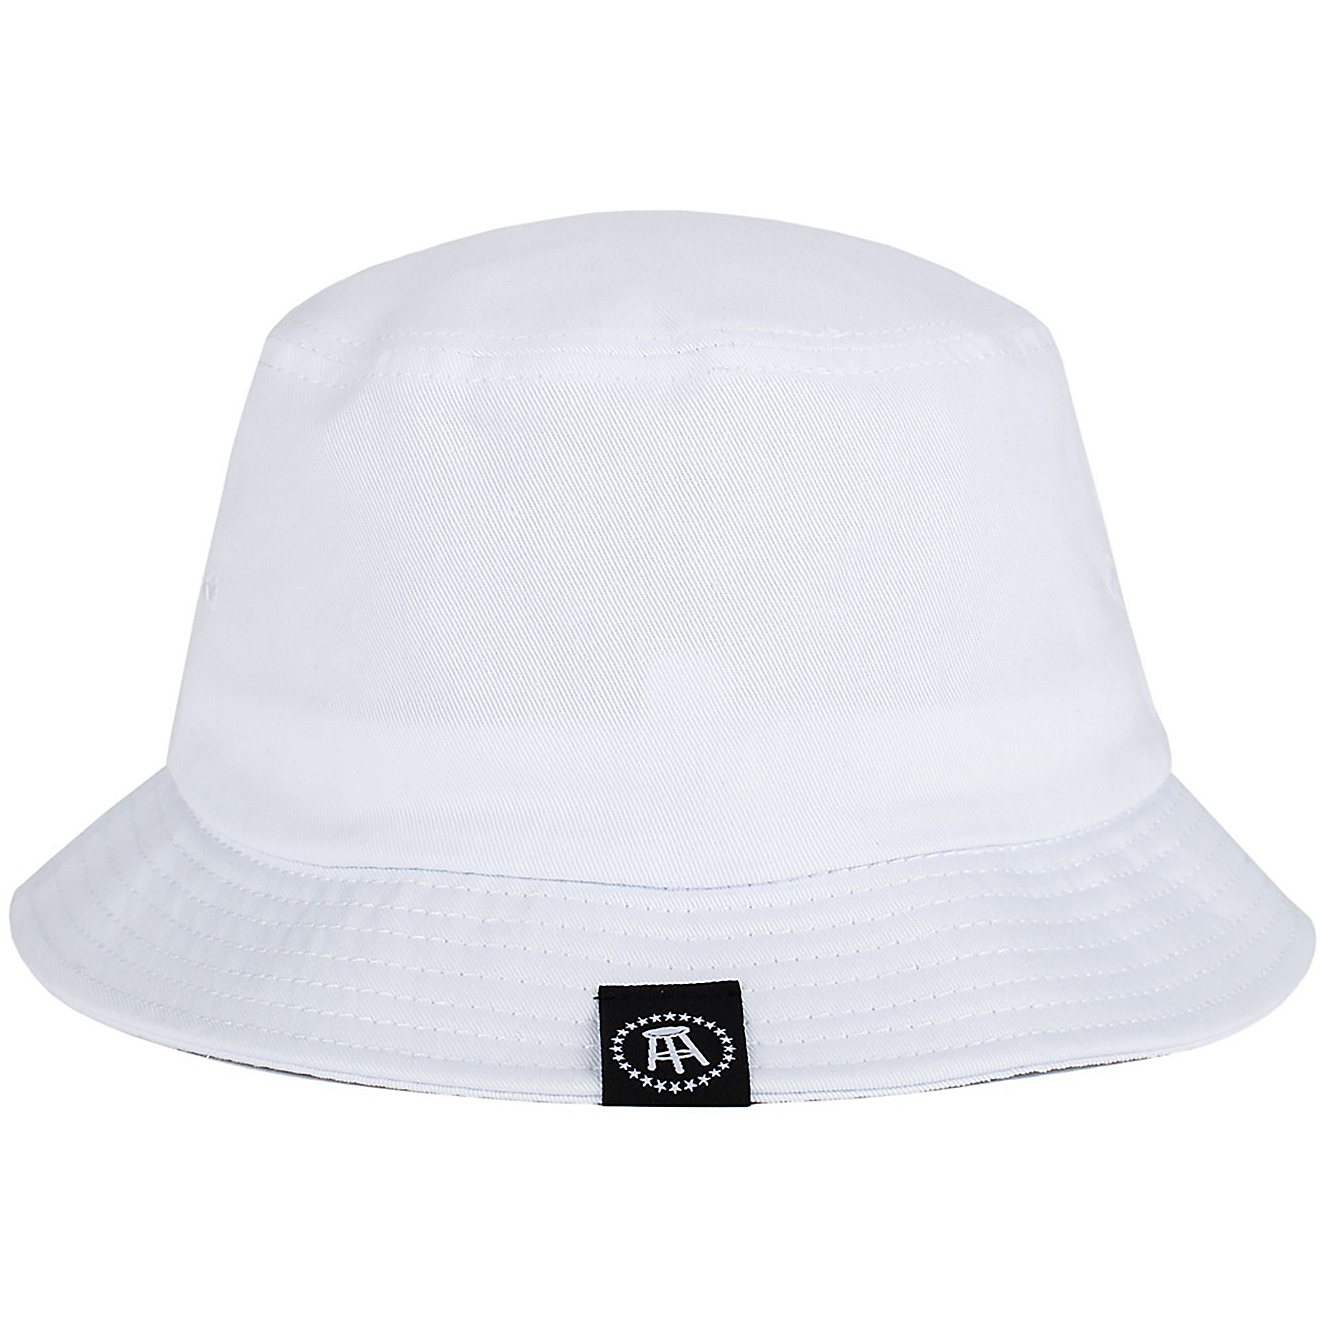 Barstool Sports Men's Saturdays Are For The Boys Bucket Hat | Academy